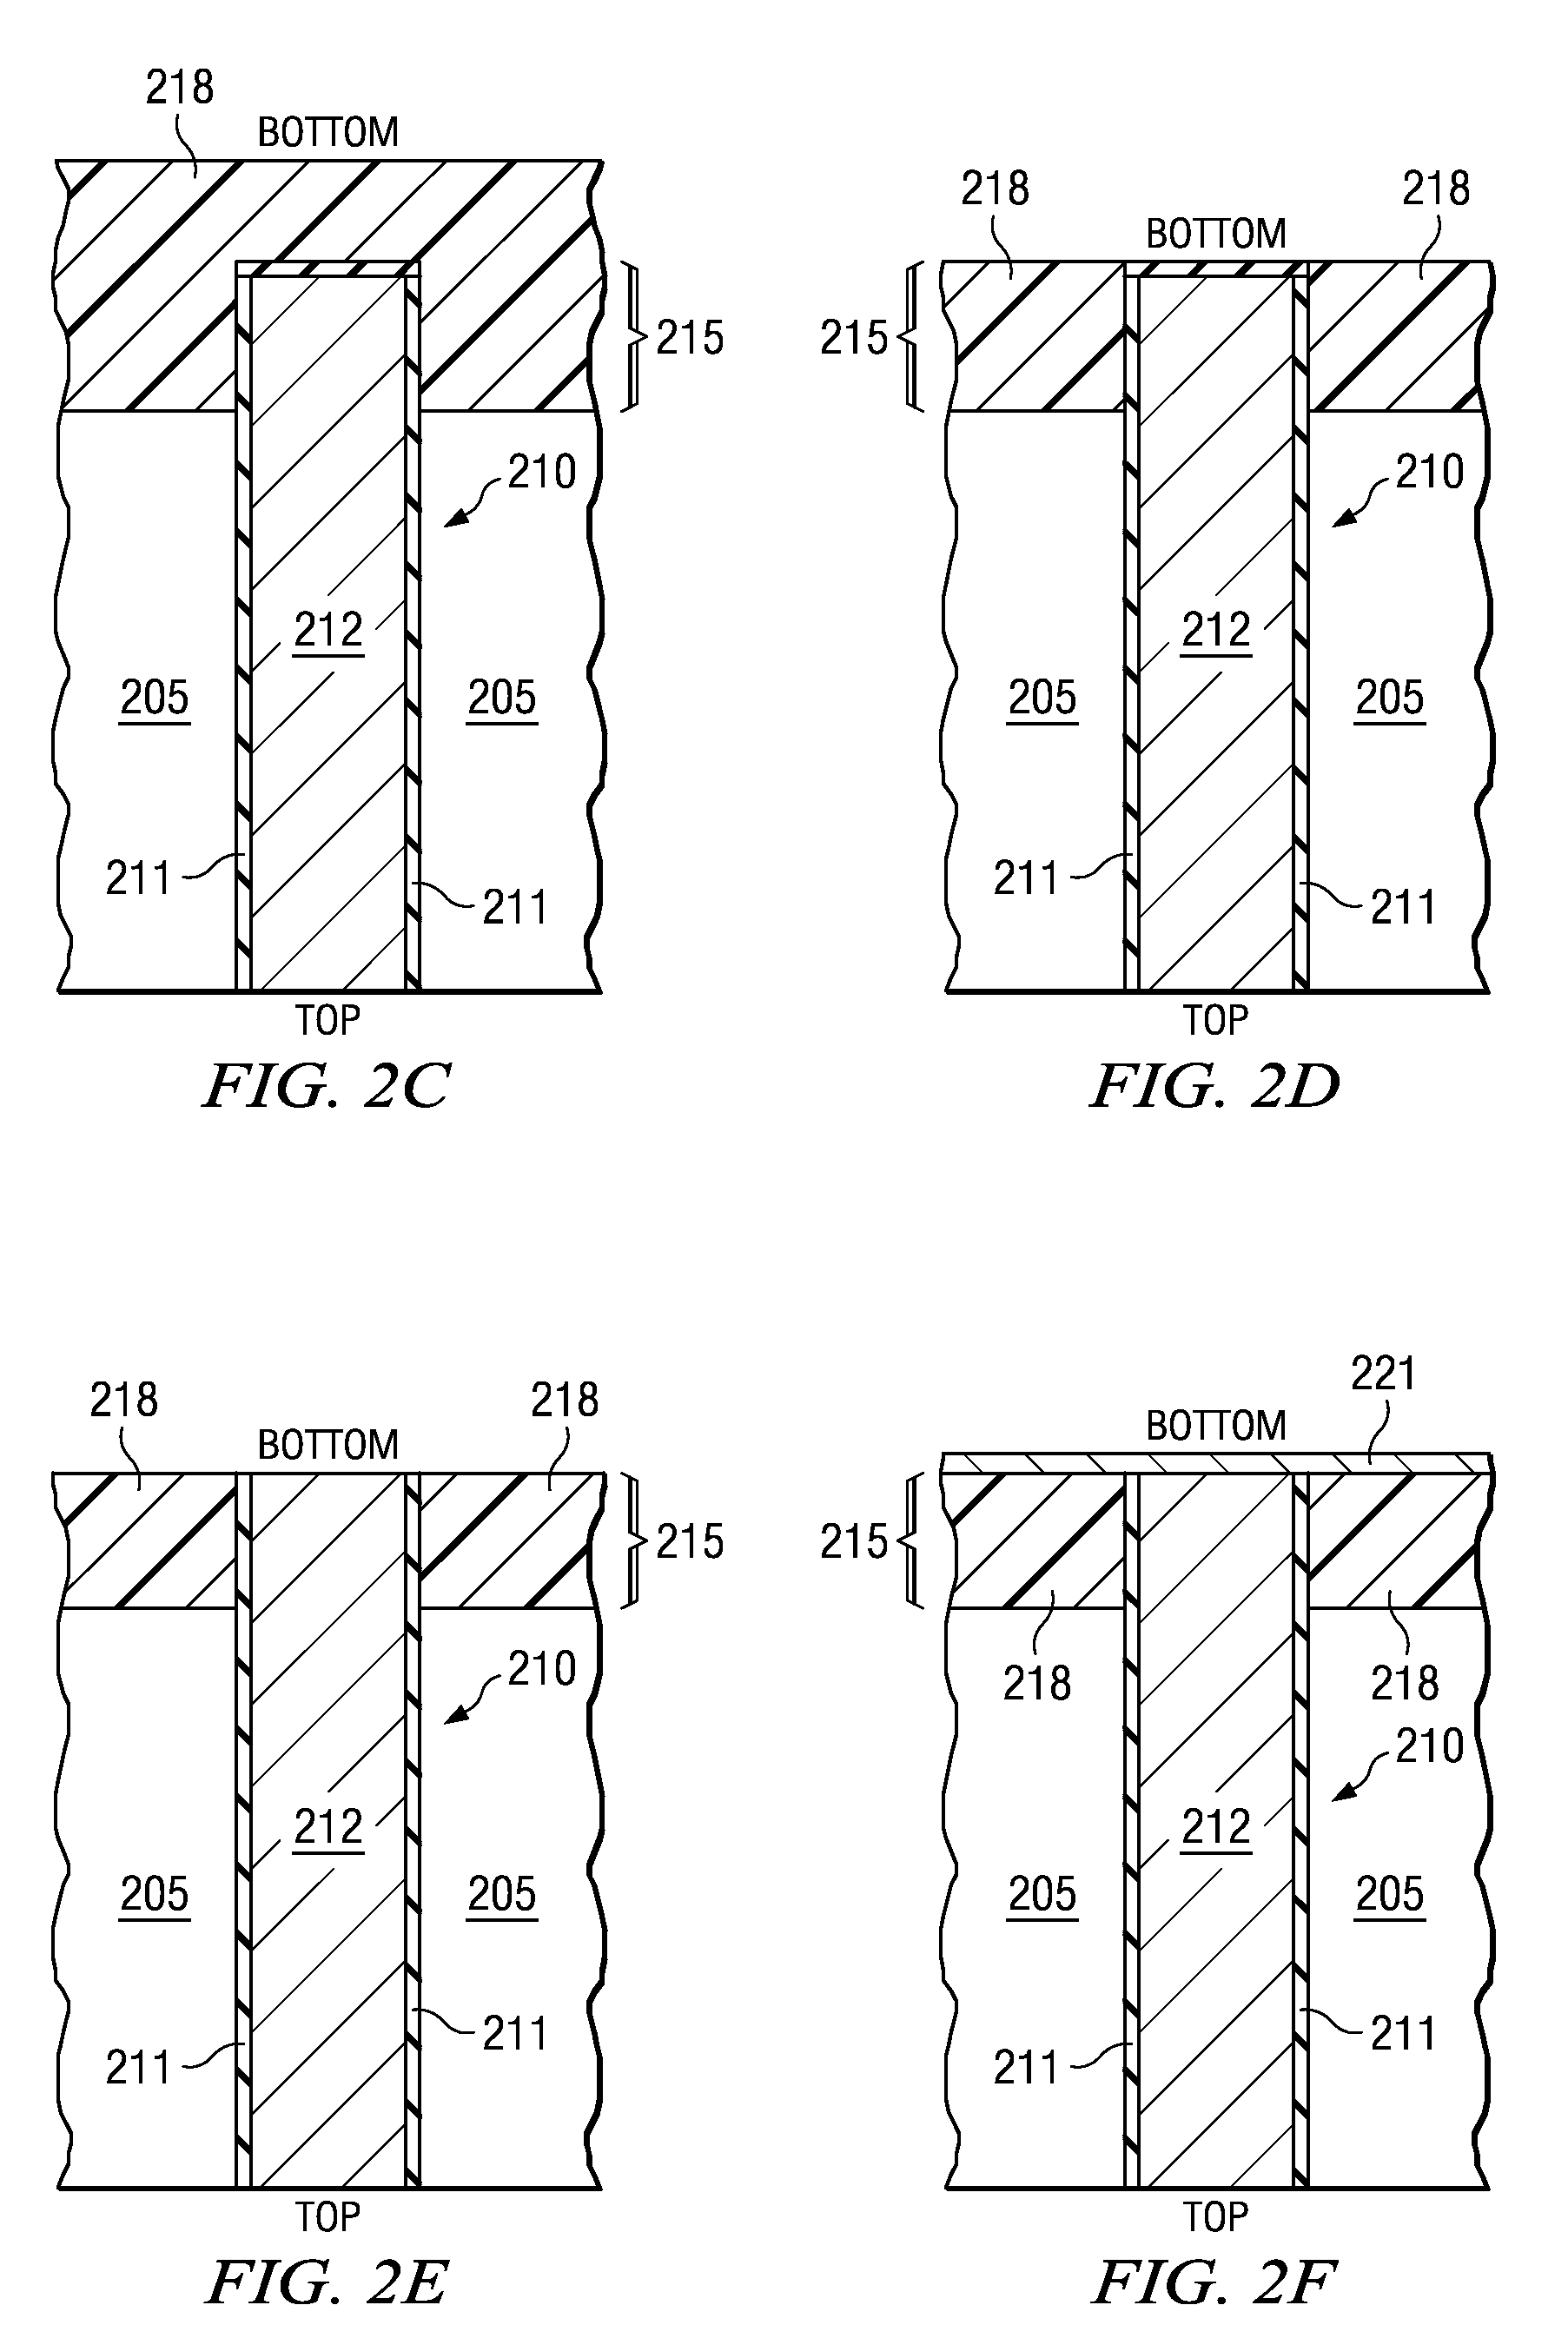 IC die having TSV and wafer level underfill and stacked IC devices comprising a workpiece solder connected to the TSV